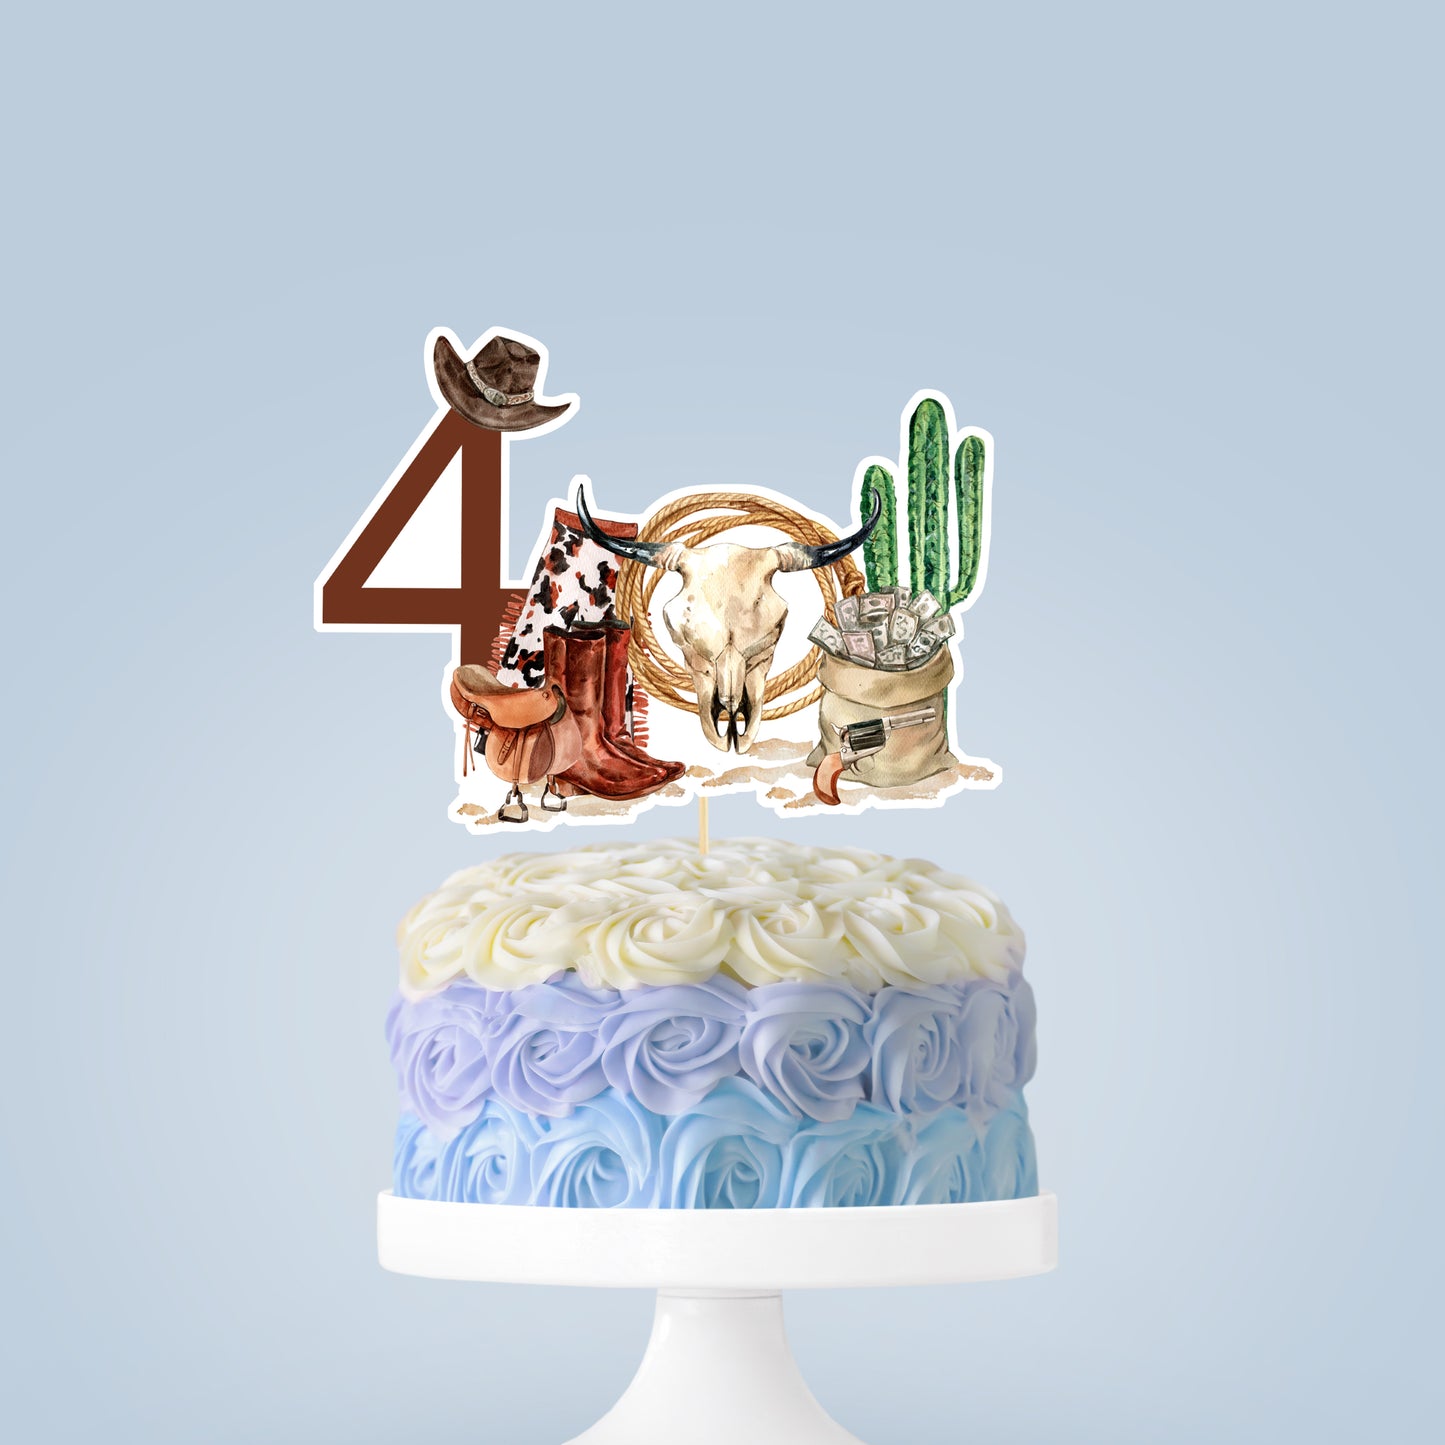 Rodeo Cake topper 4th birthday | Cowboy Party Decorations - 34A